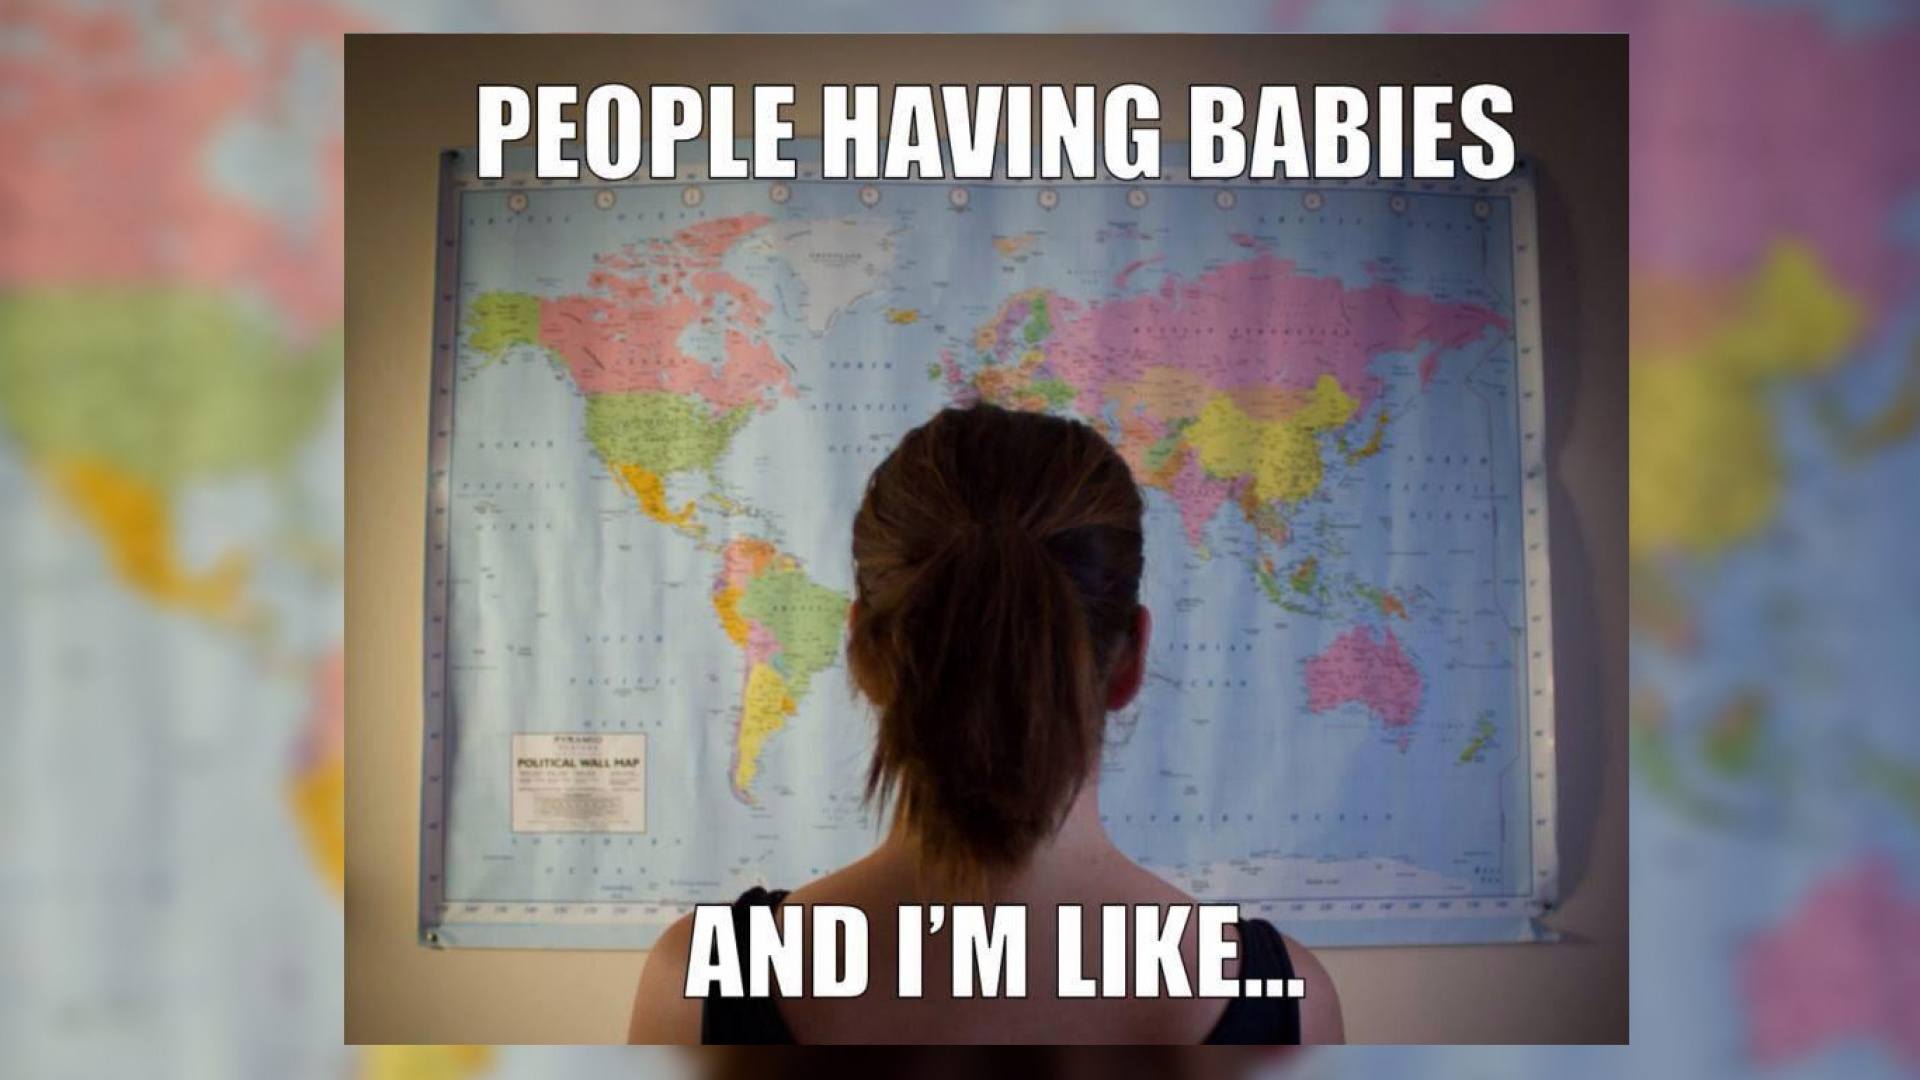 55 hilarious travel memes to inspire wanderlust and adventure #travel #funnymemes #memes